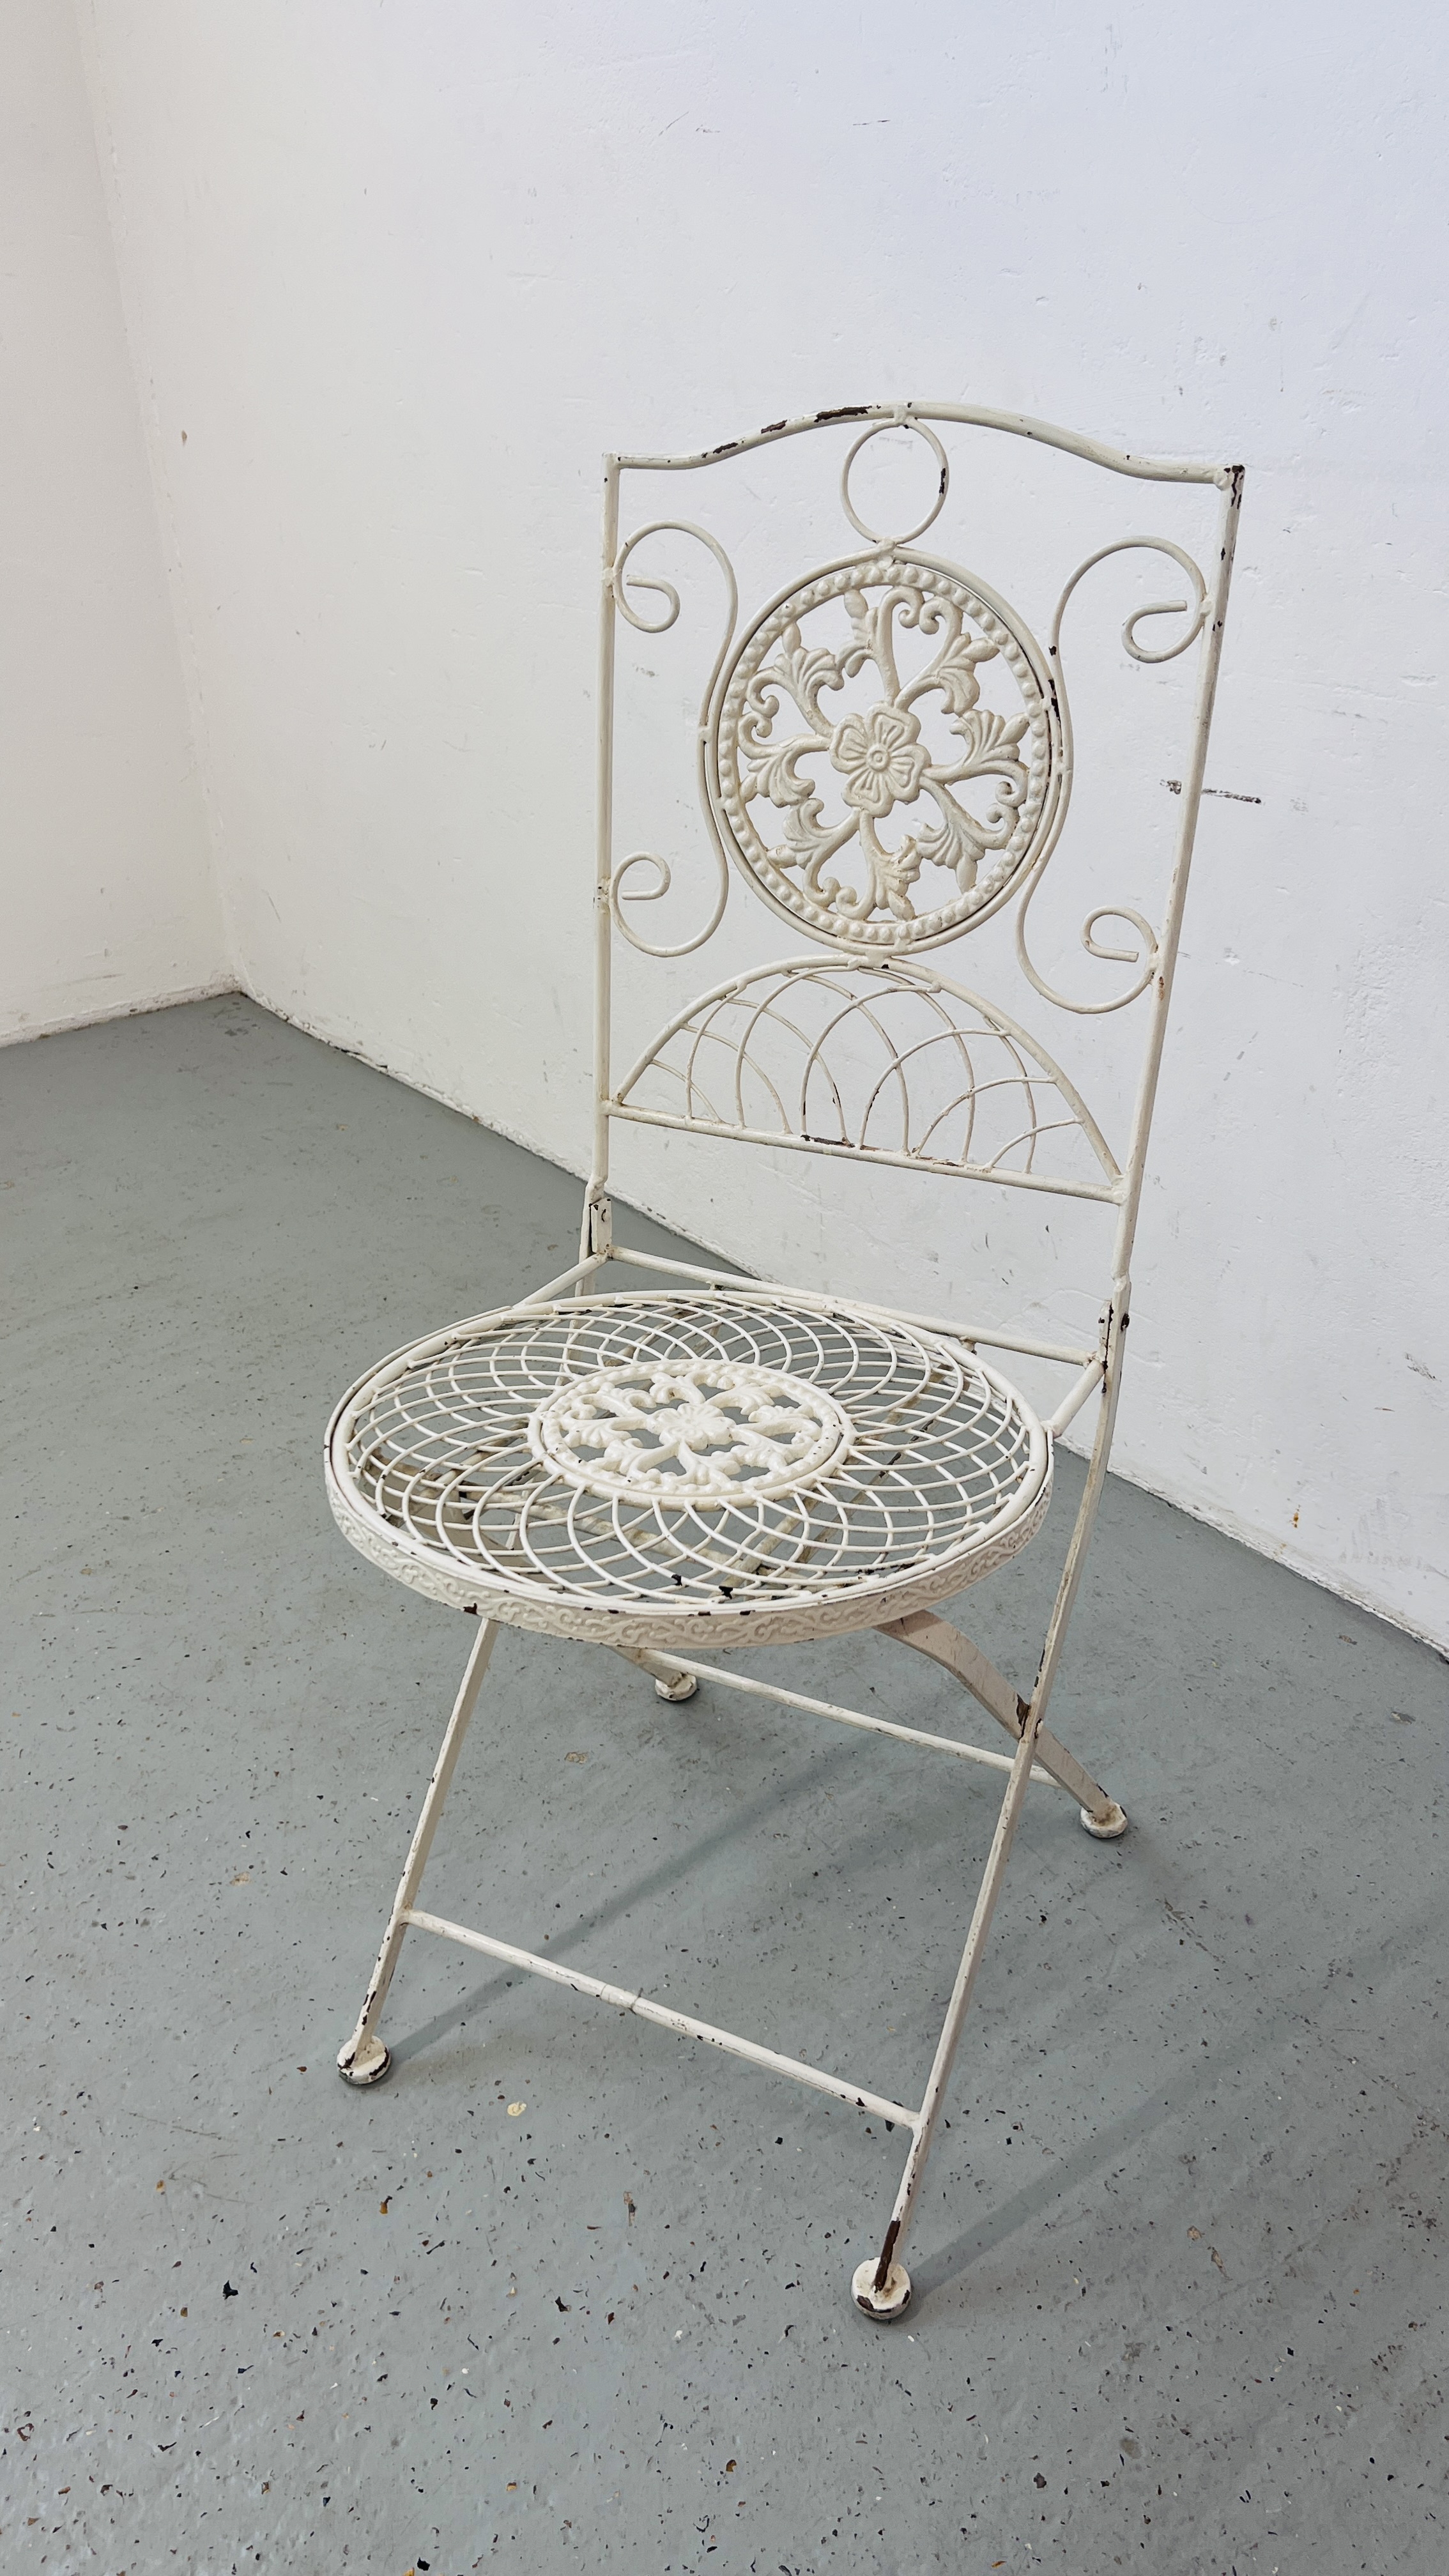 A WHITE PAINTED DECORATIVE FOLDING METALCRAFT GARDEN CHAIR.